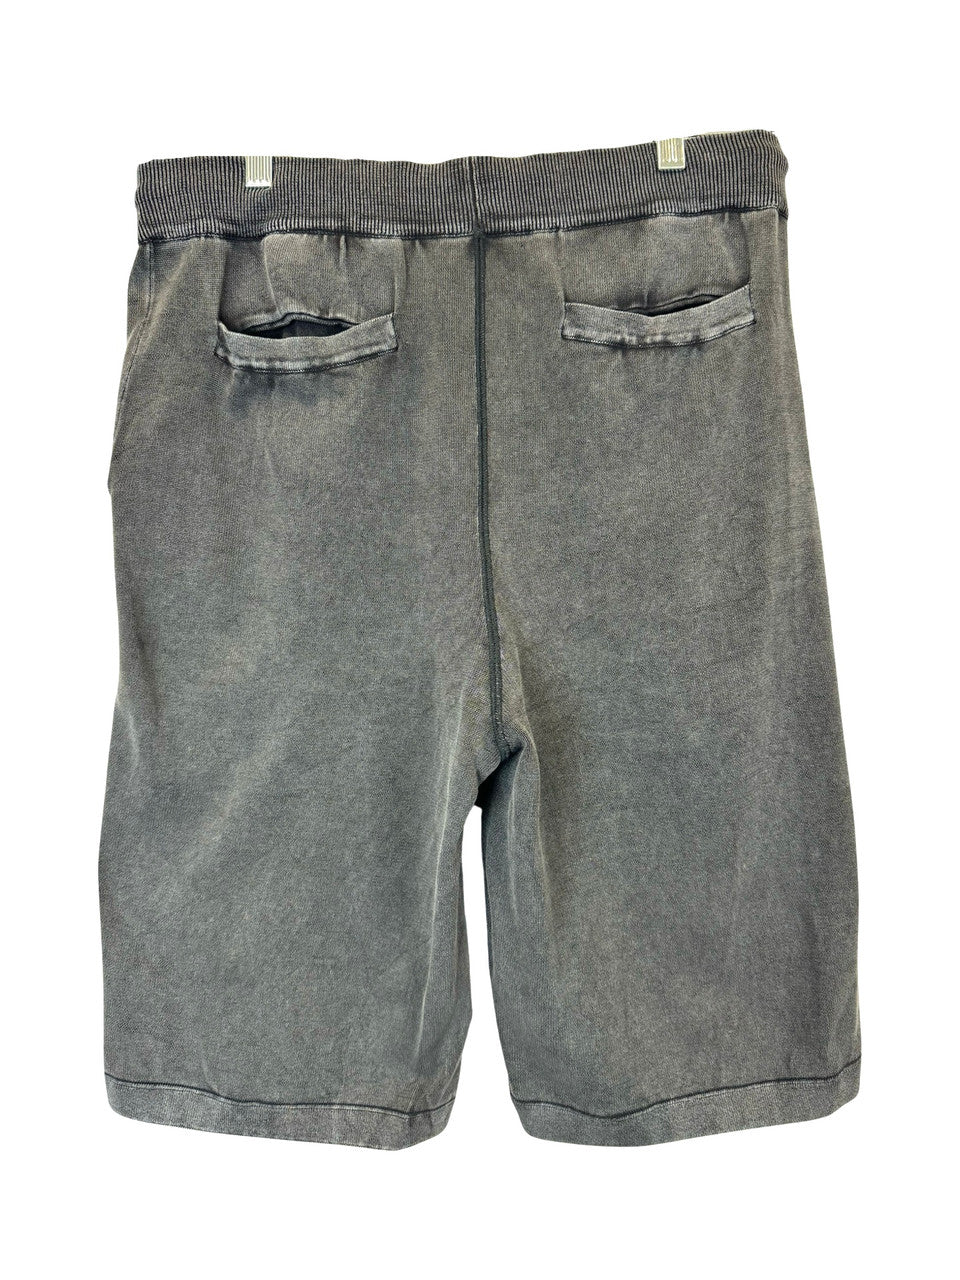 Lad by Demylee Knit Shorts-Gray Back